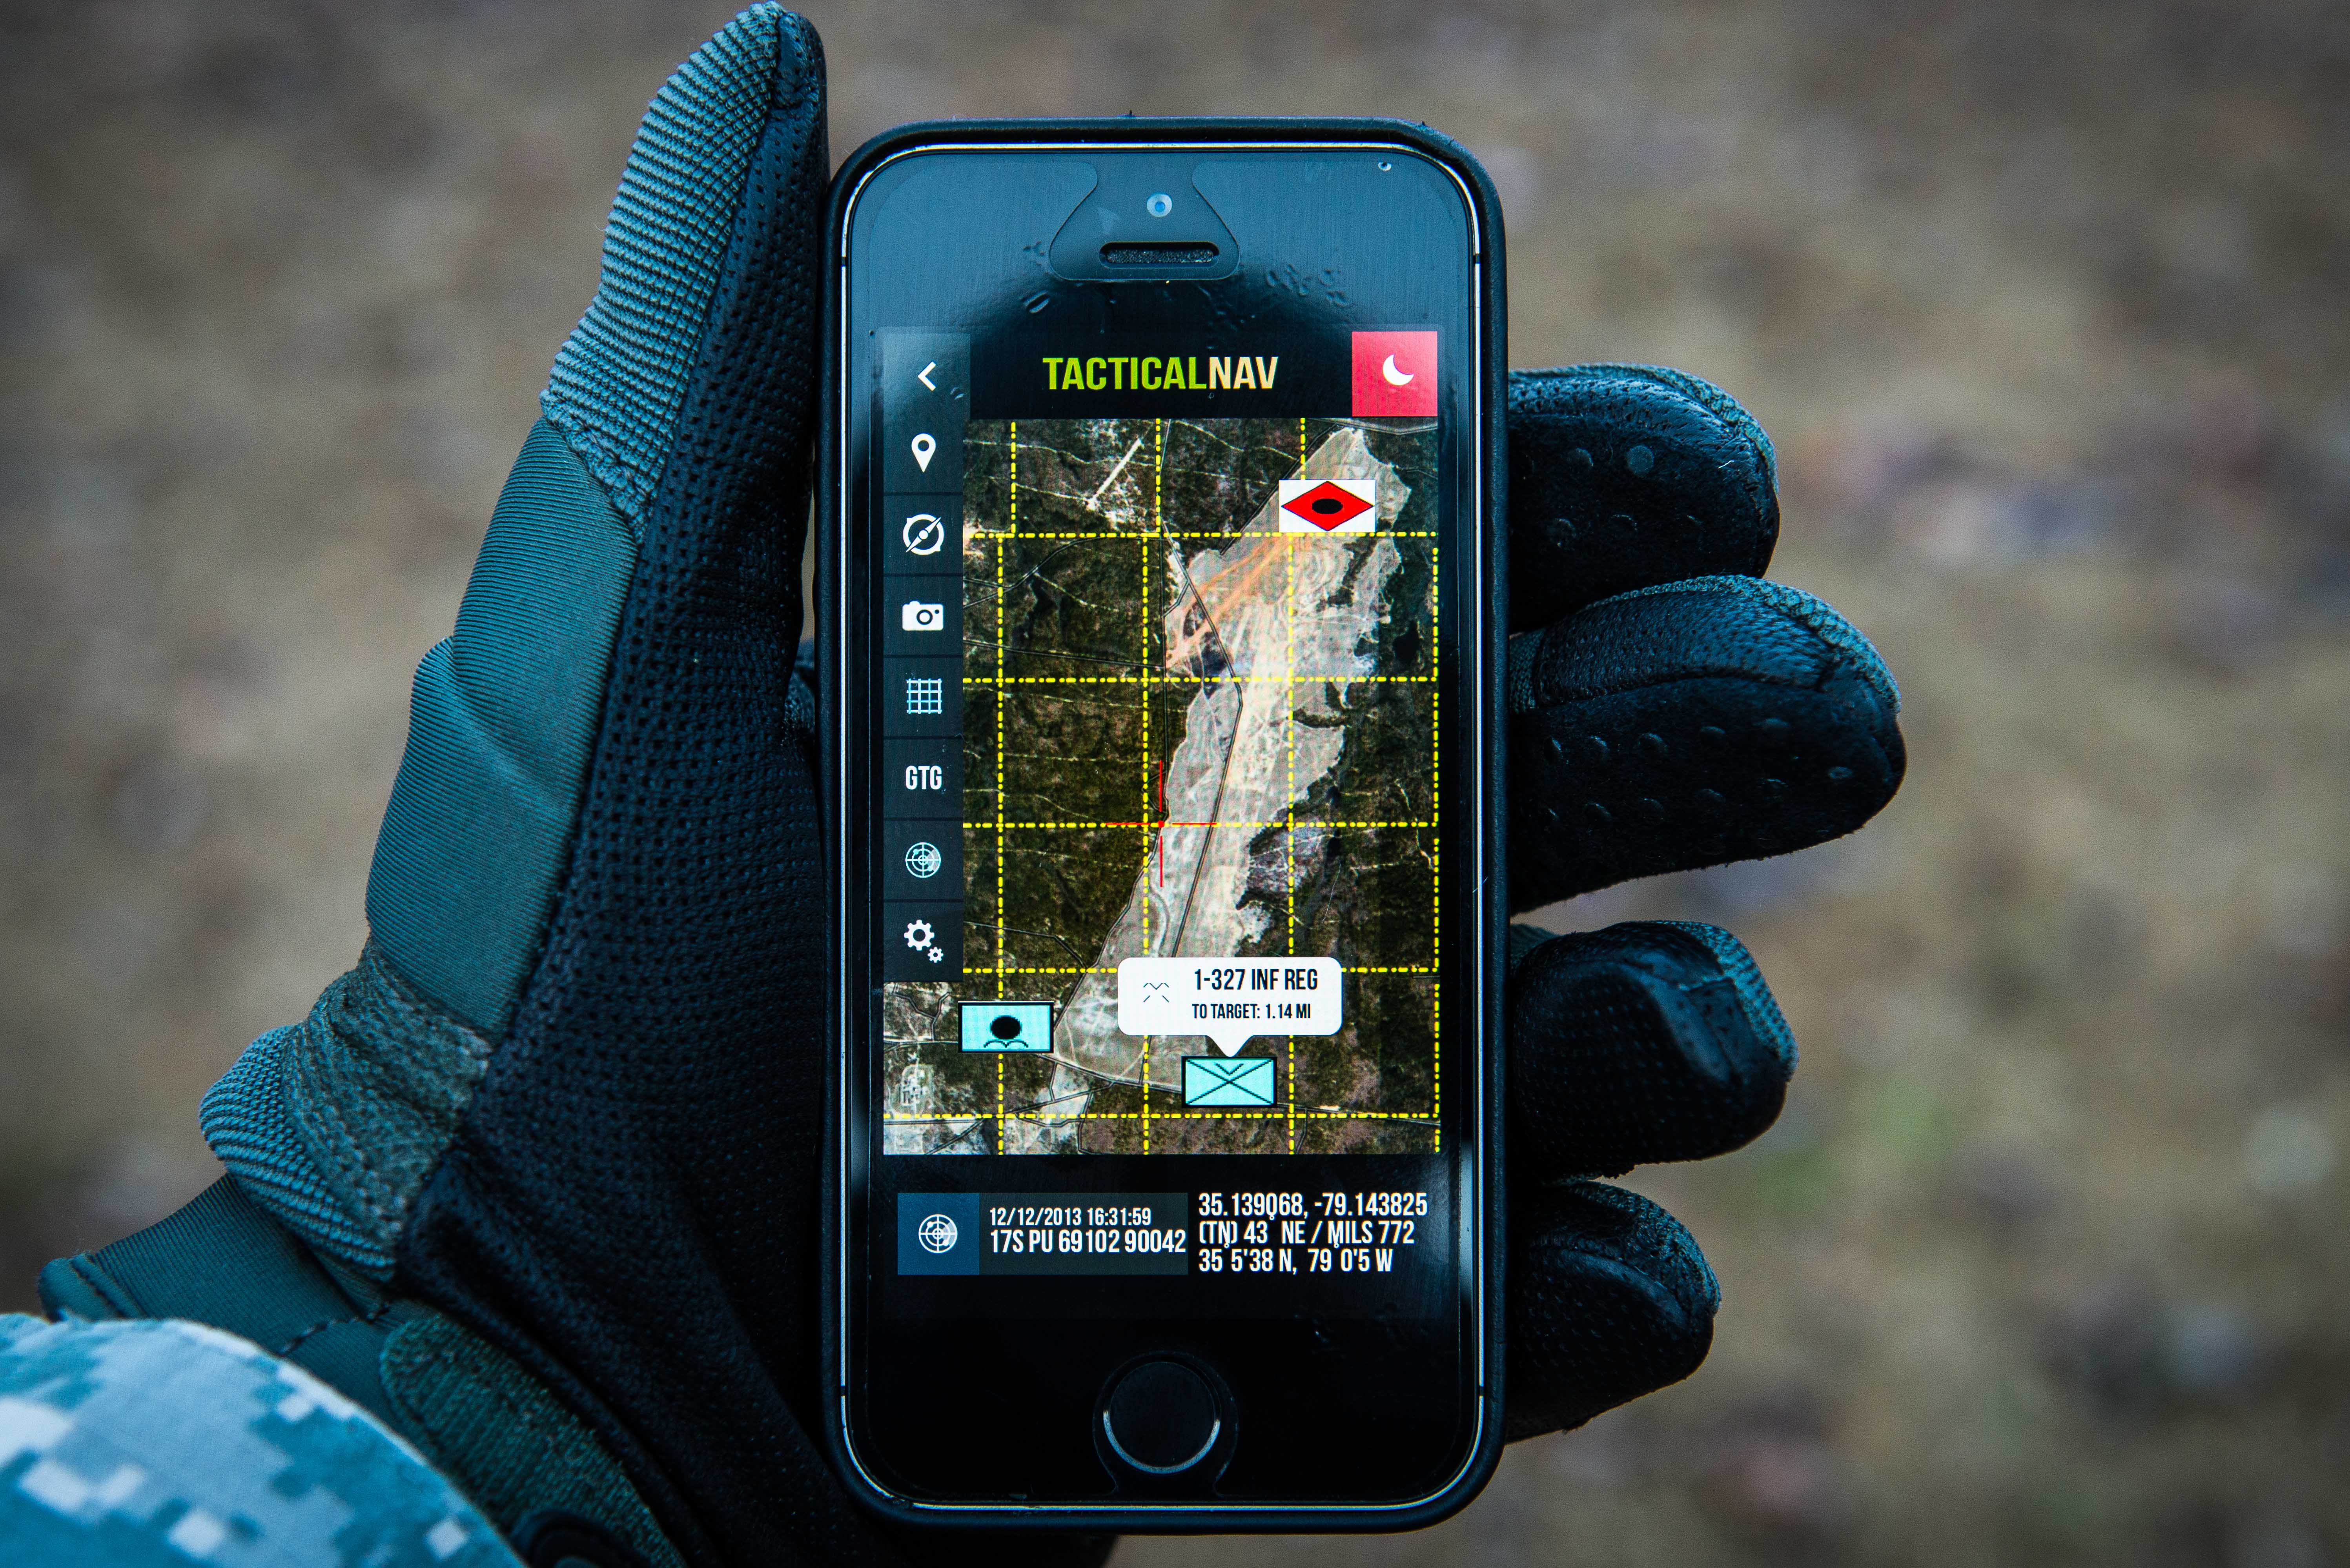 Popular Navigation App ‘Tactical NAV’ Updated With iOS 7 Redesign